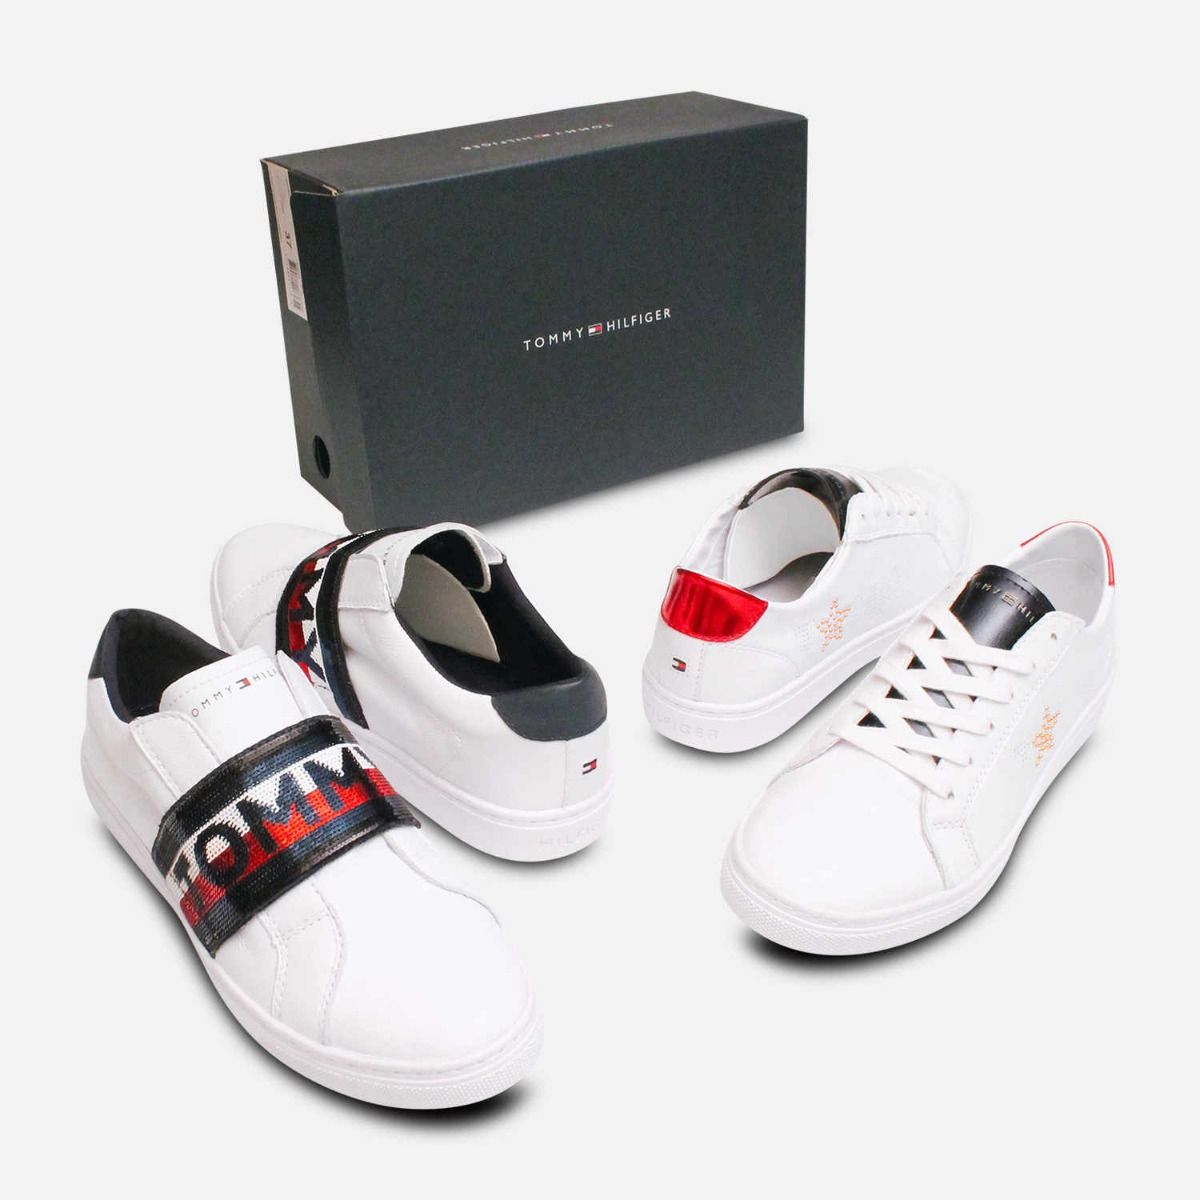 tommy hilfiger white and gold sneakers